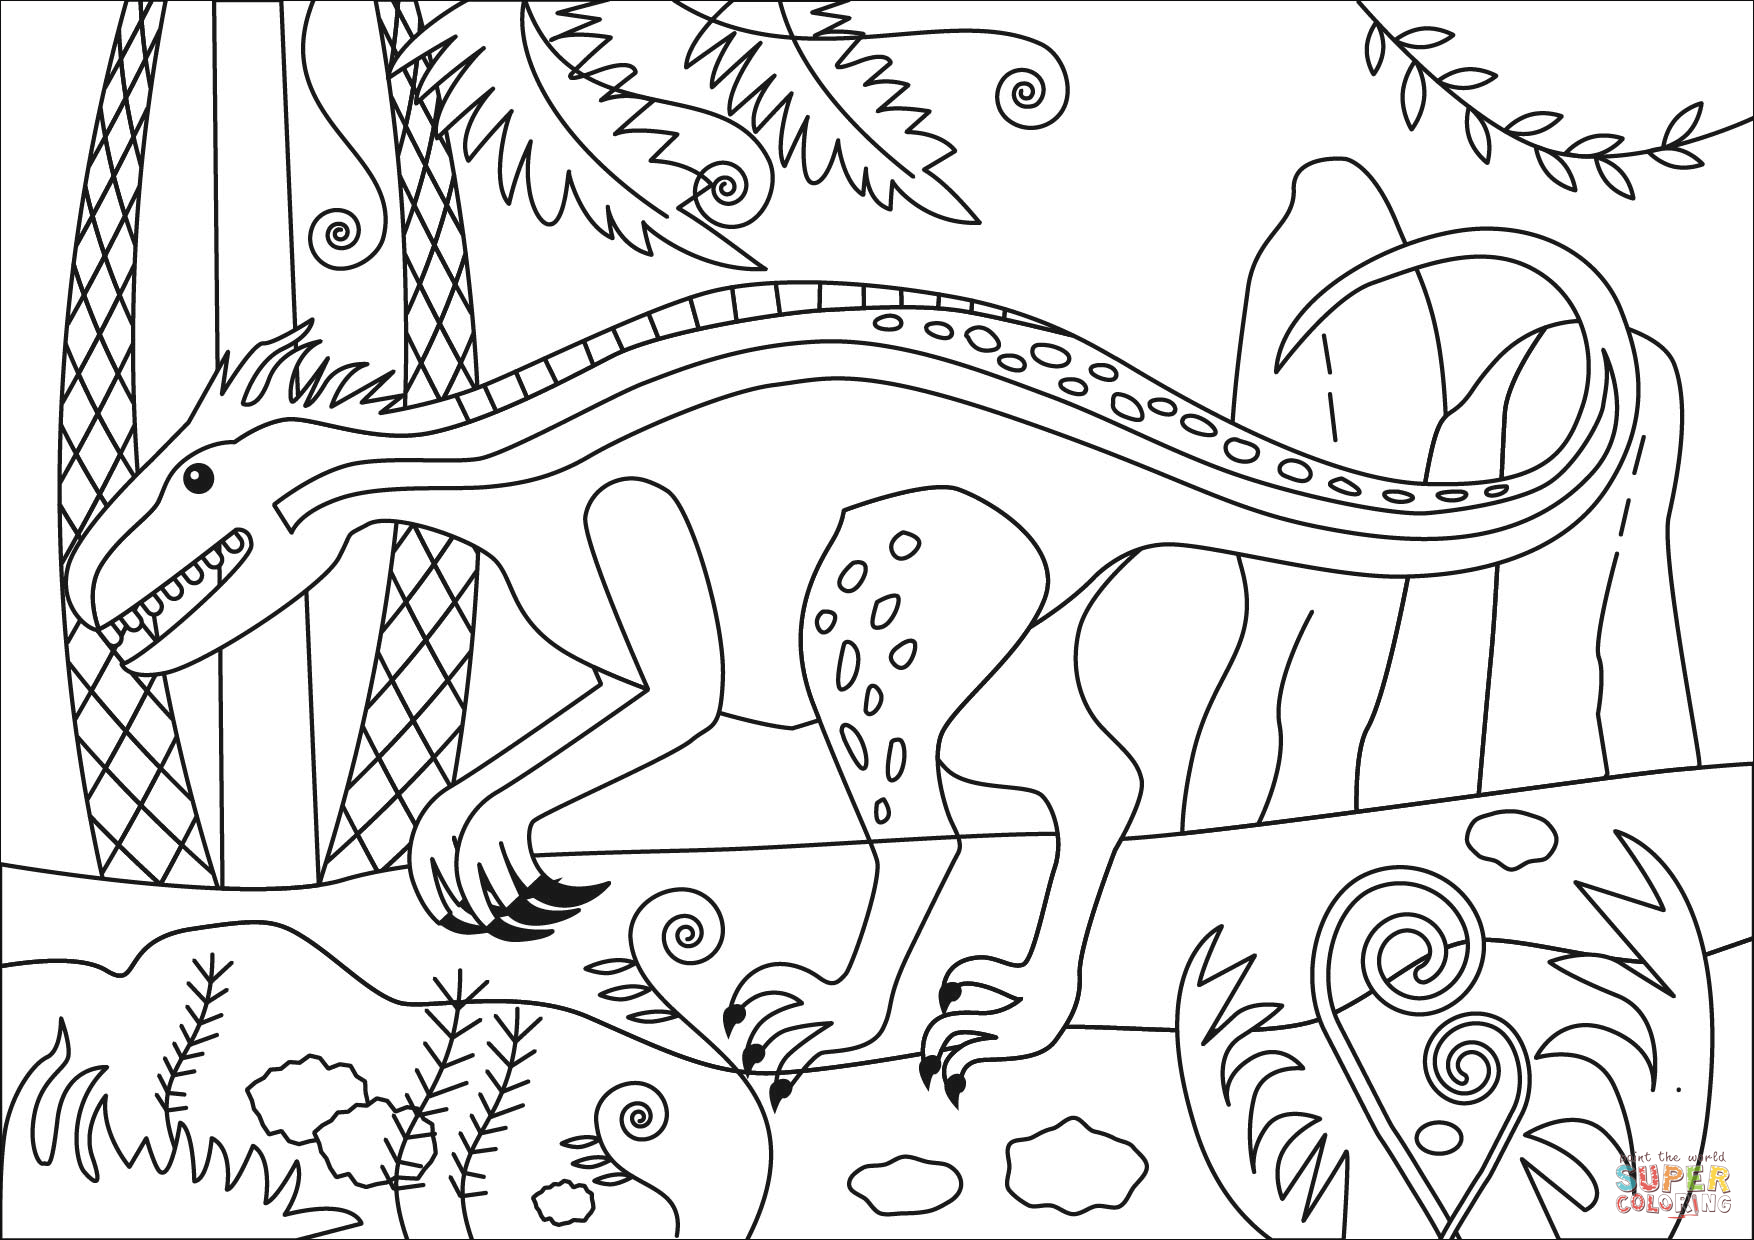 Indoraptor coloring page free printable coloring pages